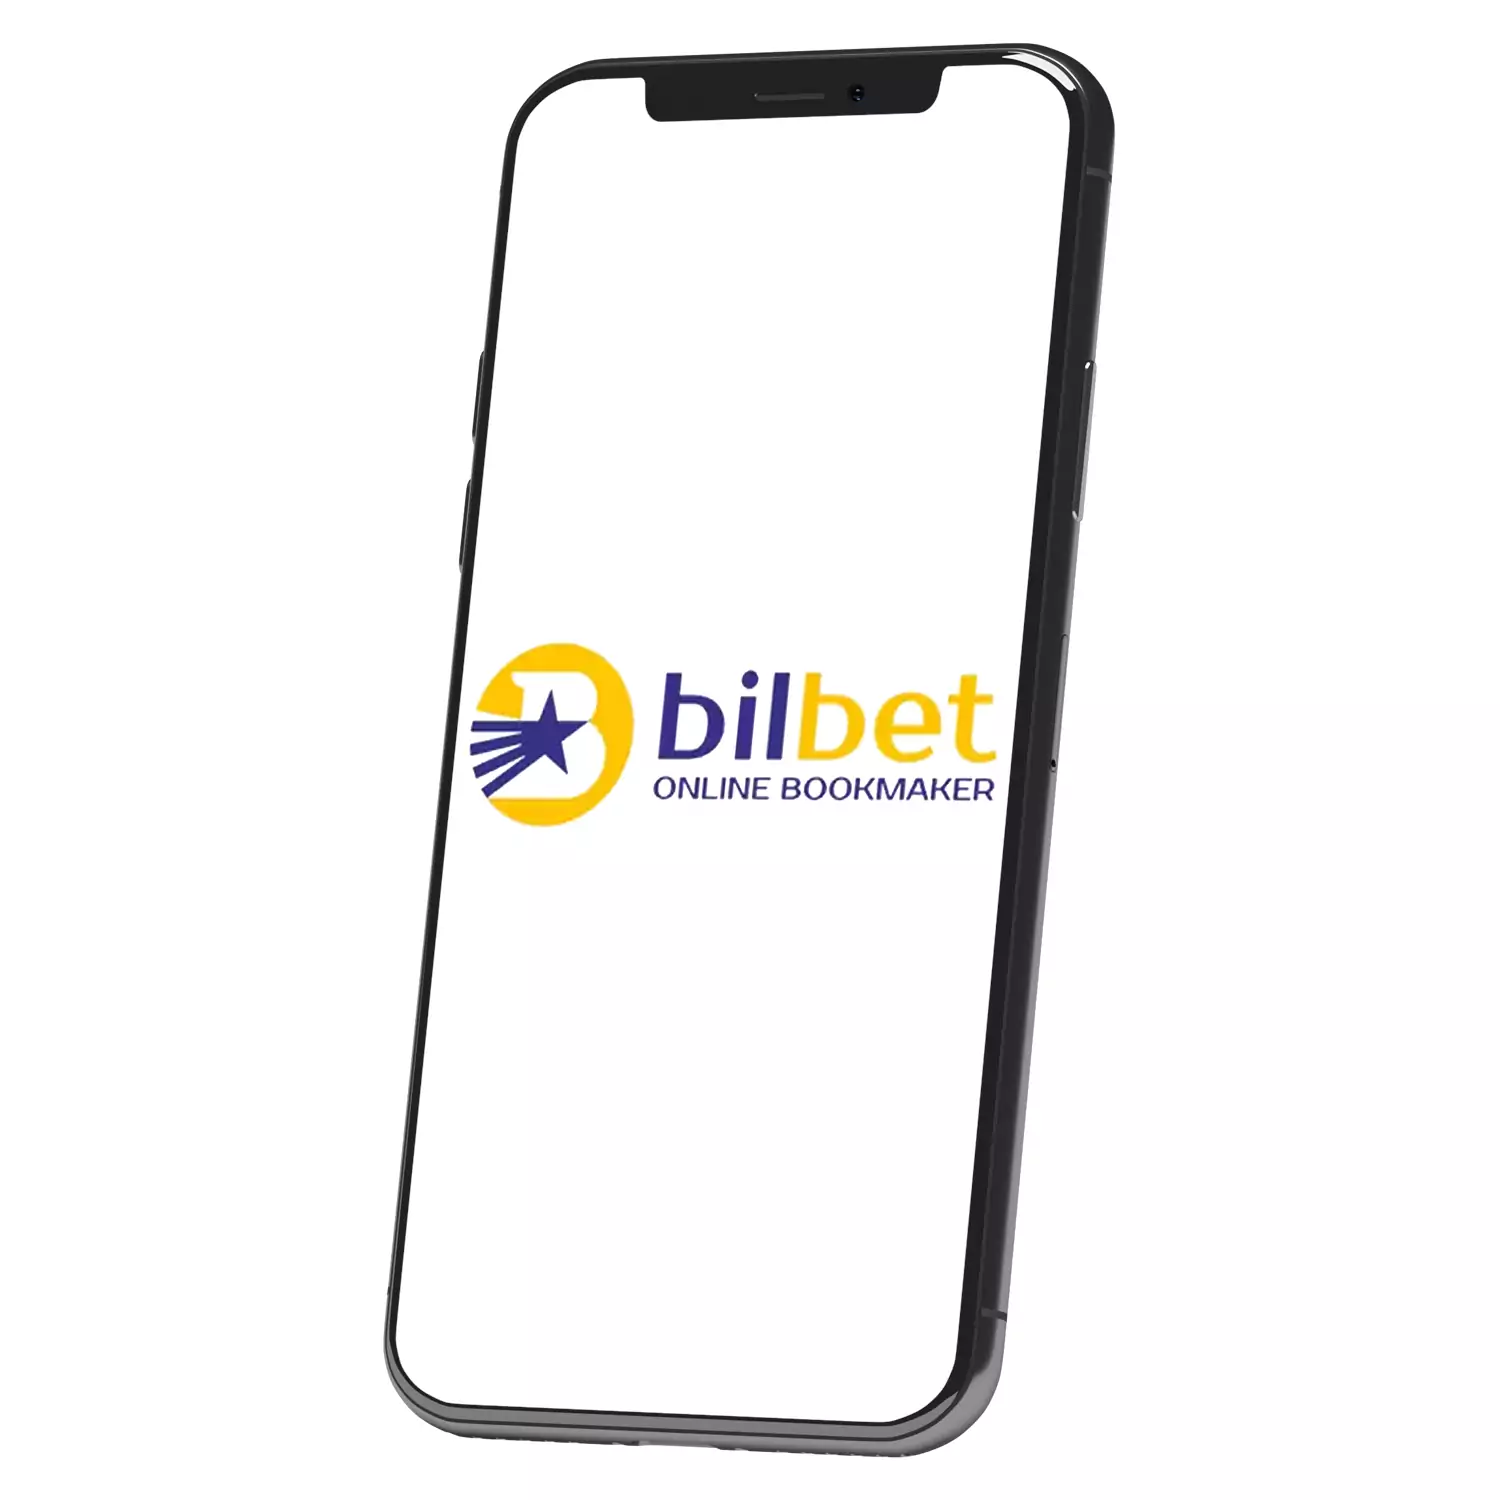 The Bilbet app is available for Android.